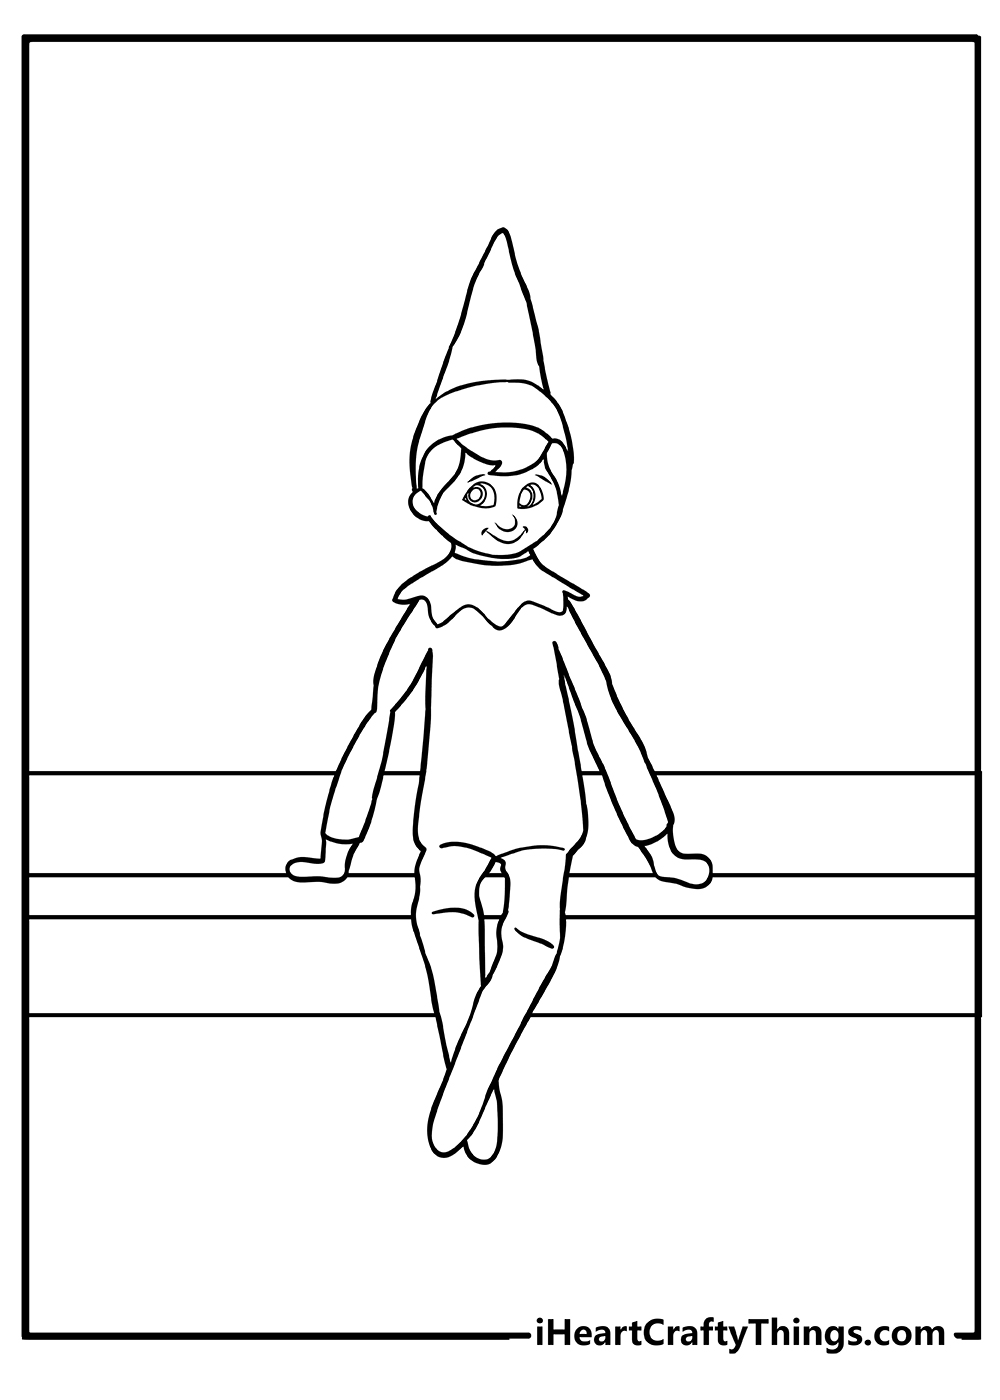 original Elf on the Shelf Coloring Pages